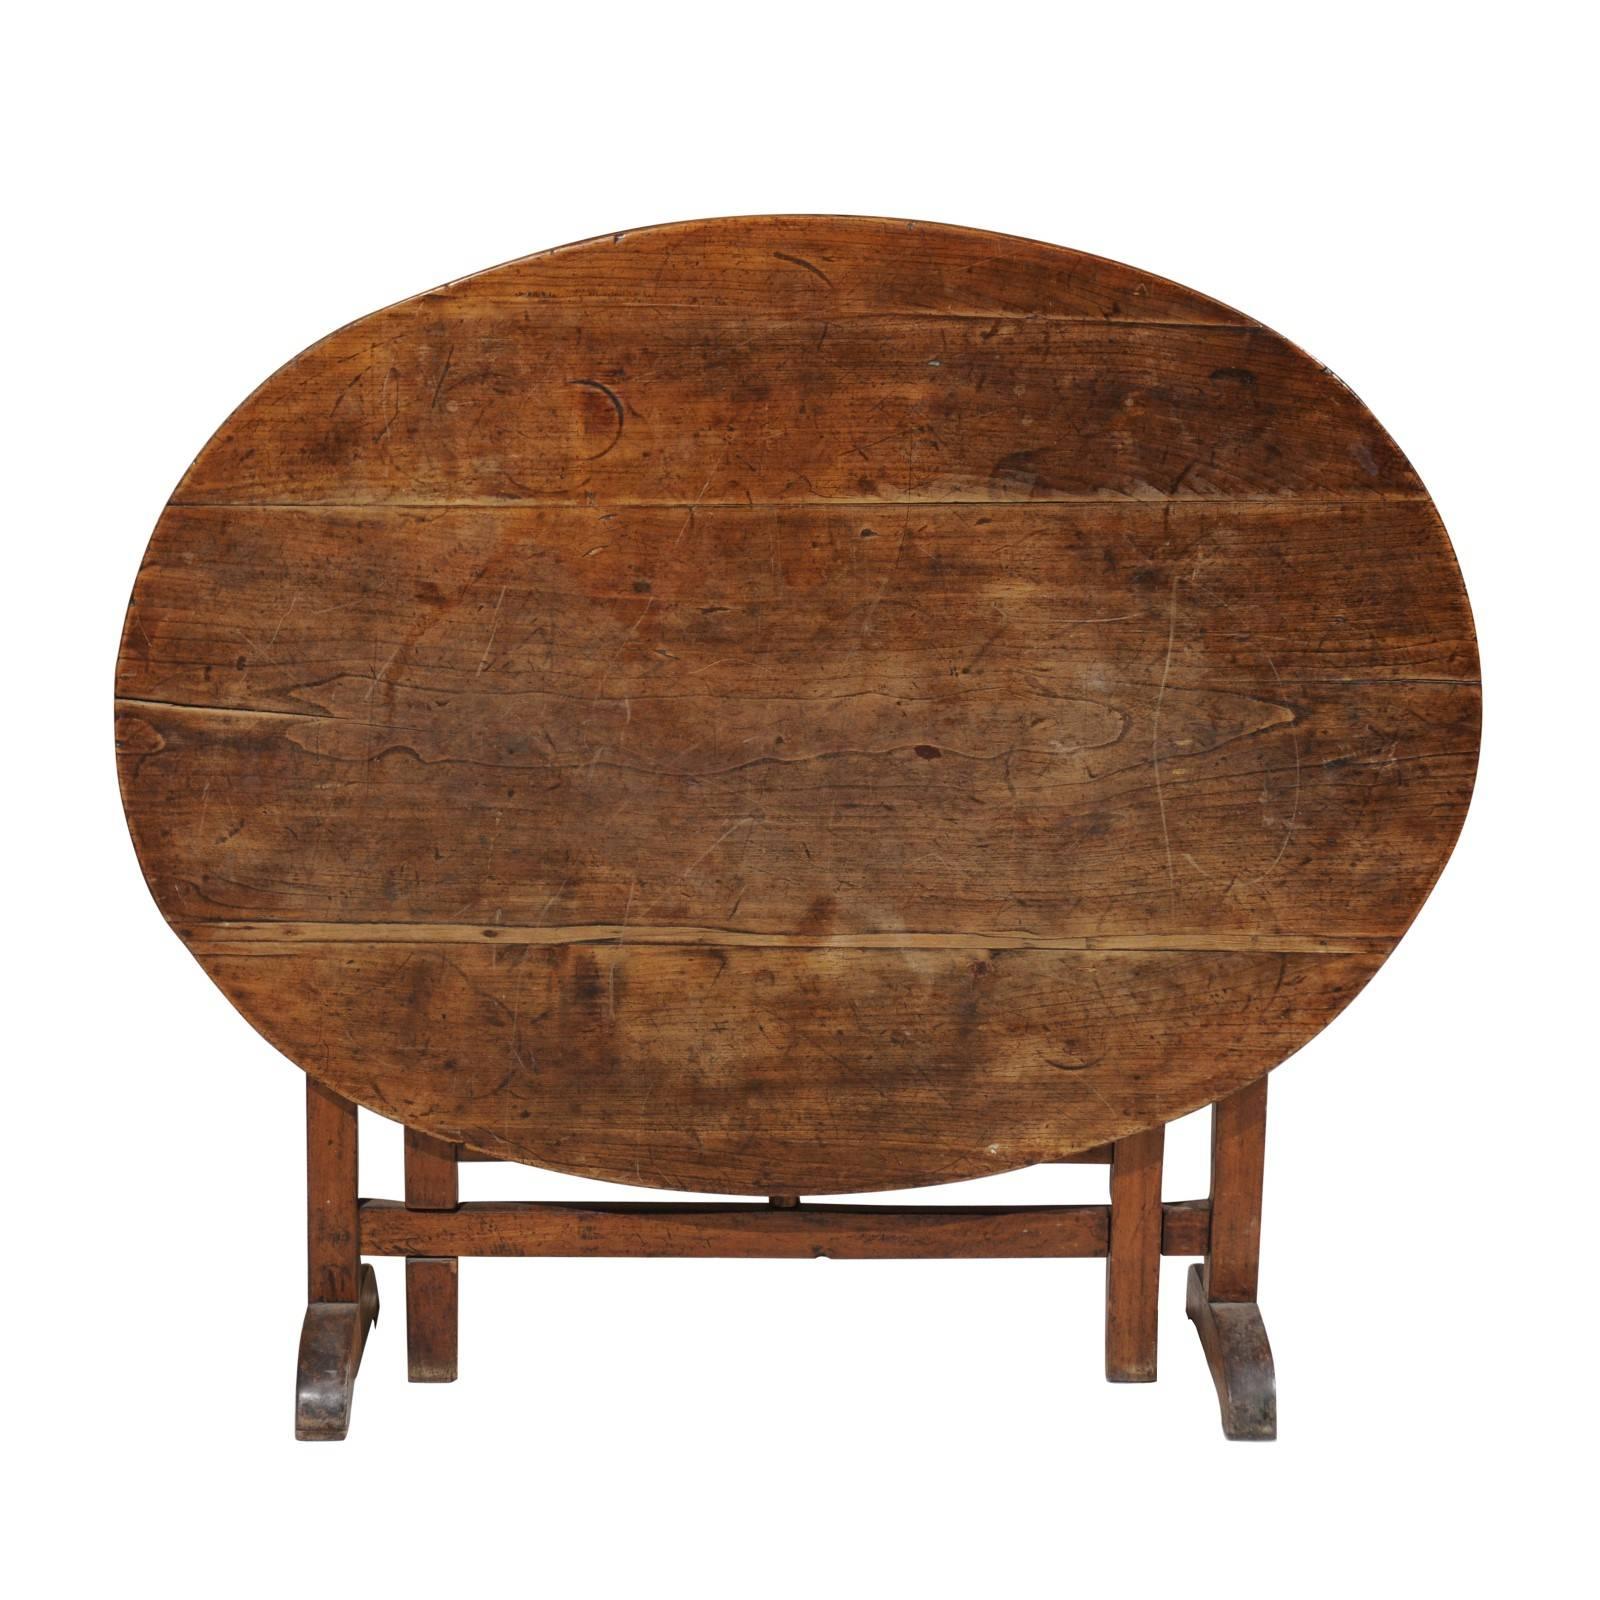 Large French Tilt-Top Oval Shaped Wine Tasting Table from the 19th Century